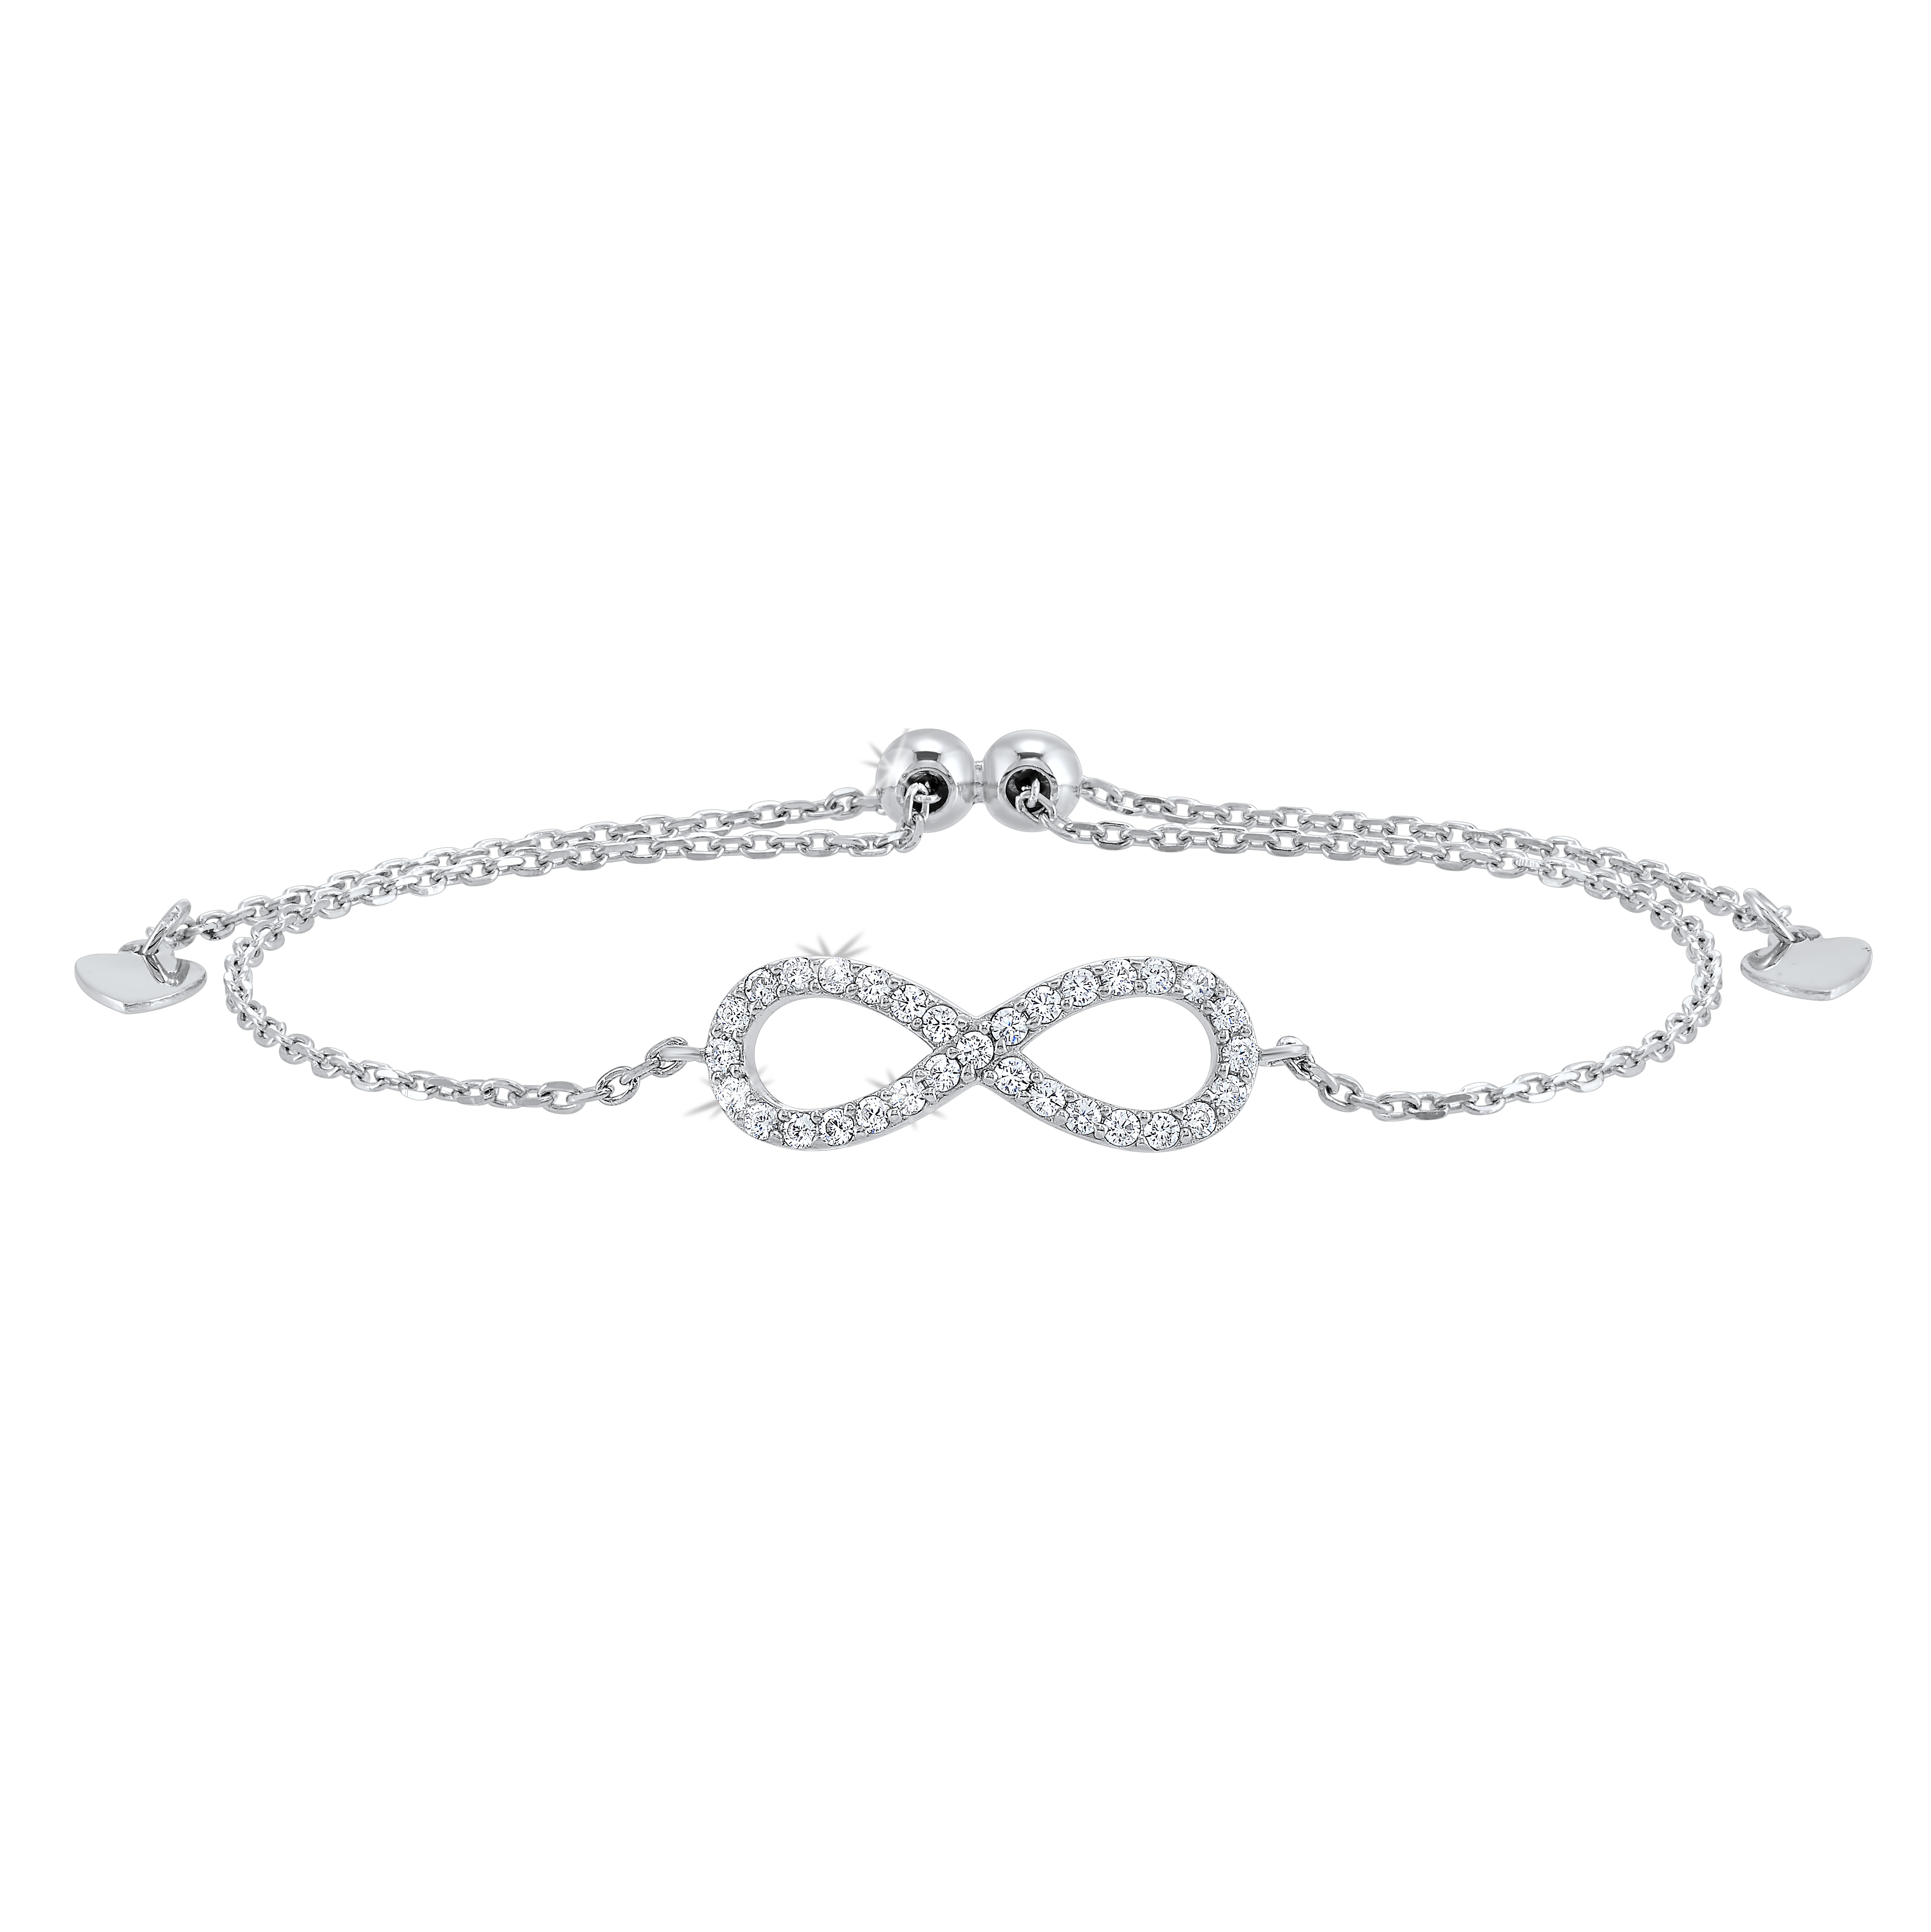 Pure Silver Infinity bracelet at Rs 498 in Bengaluru | ID: 2848940346255